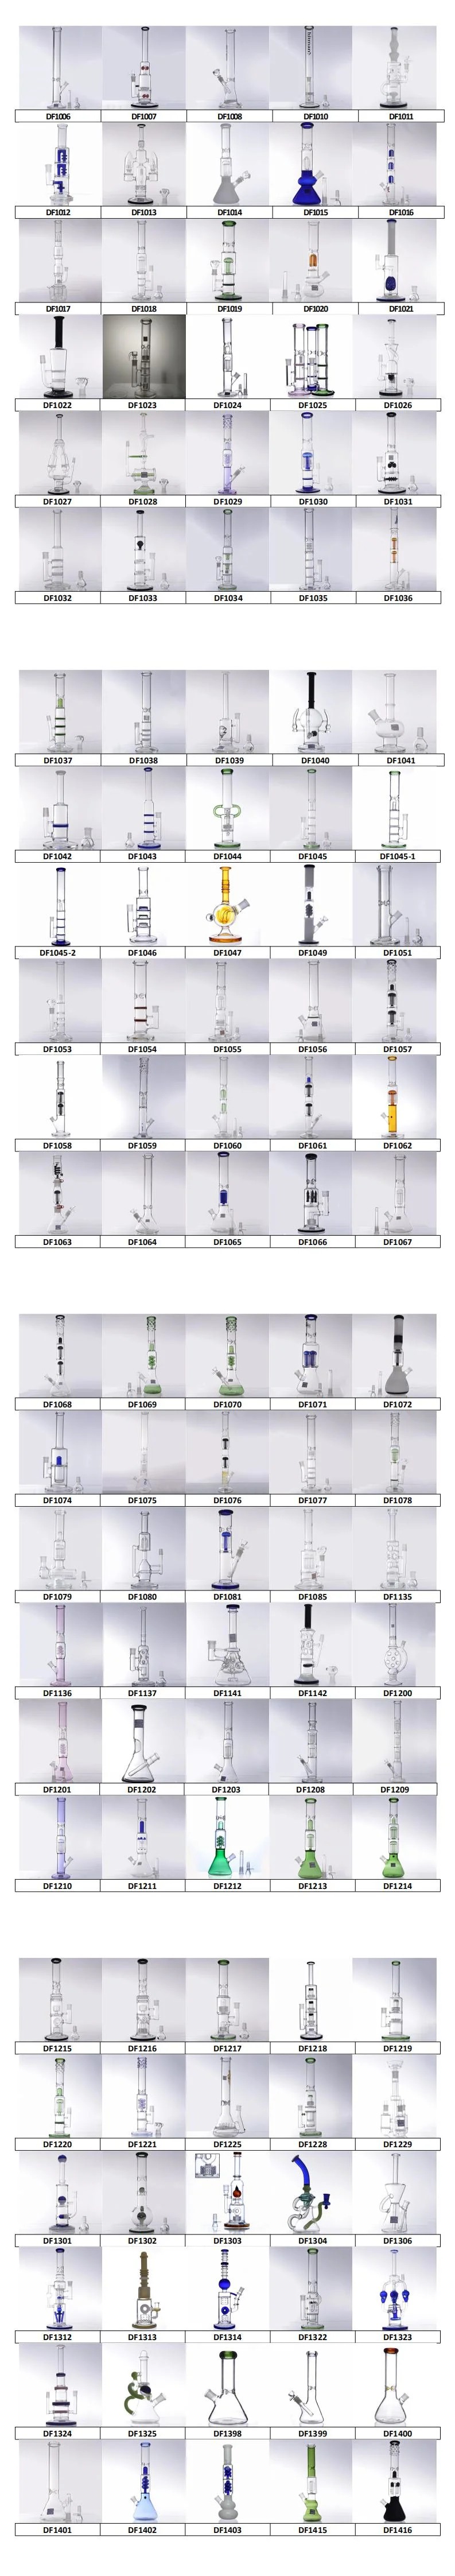 DF1028 Bh Smoking Water Pipes with High-End Glass Shisha Hookah Pipe